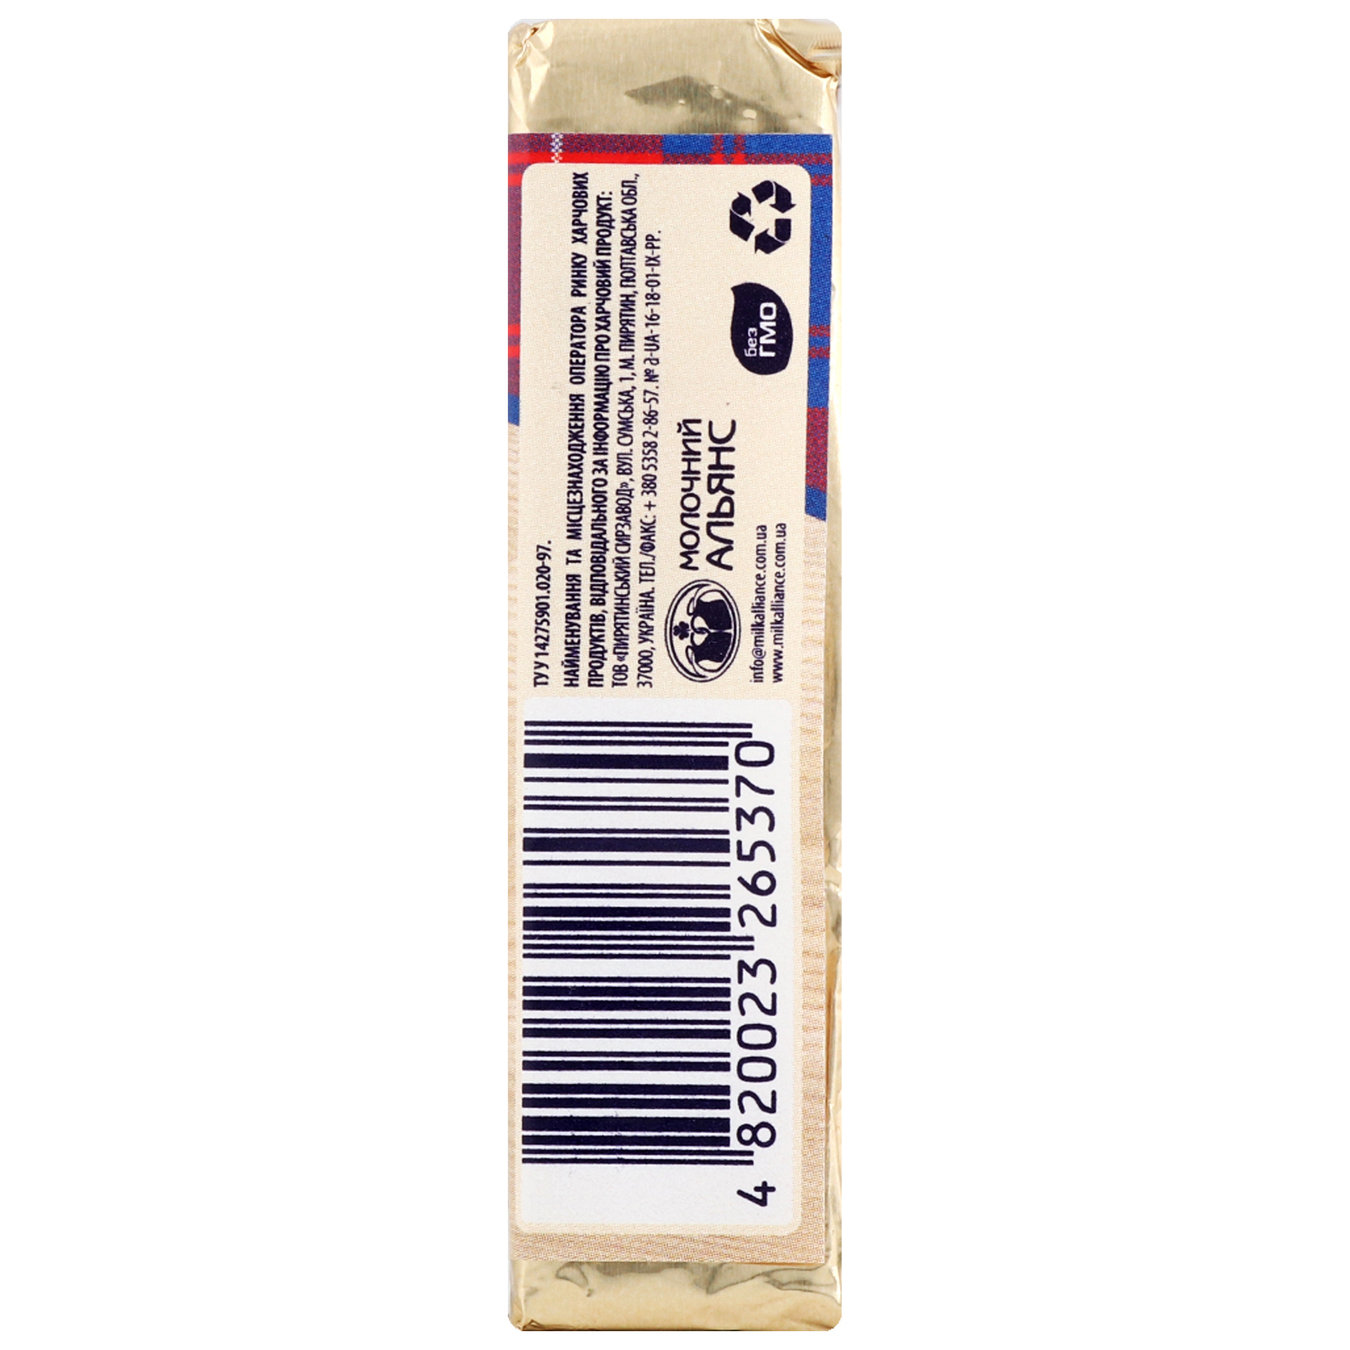 Slavia Holland processed cheese 45% 70g 2